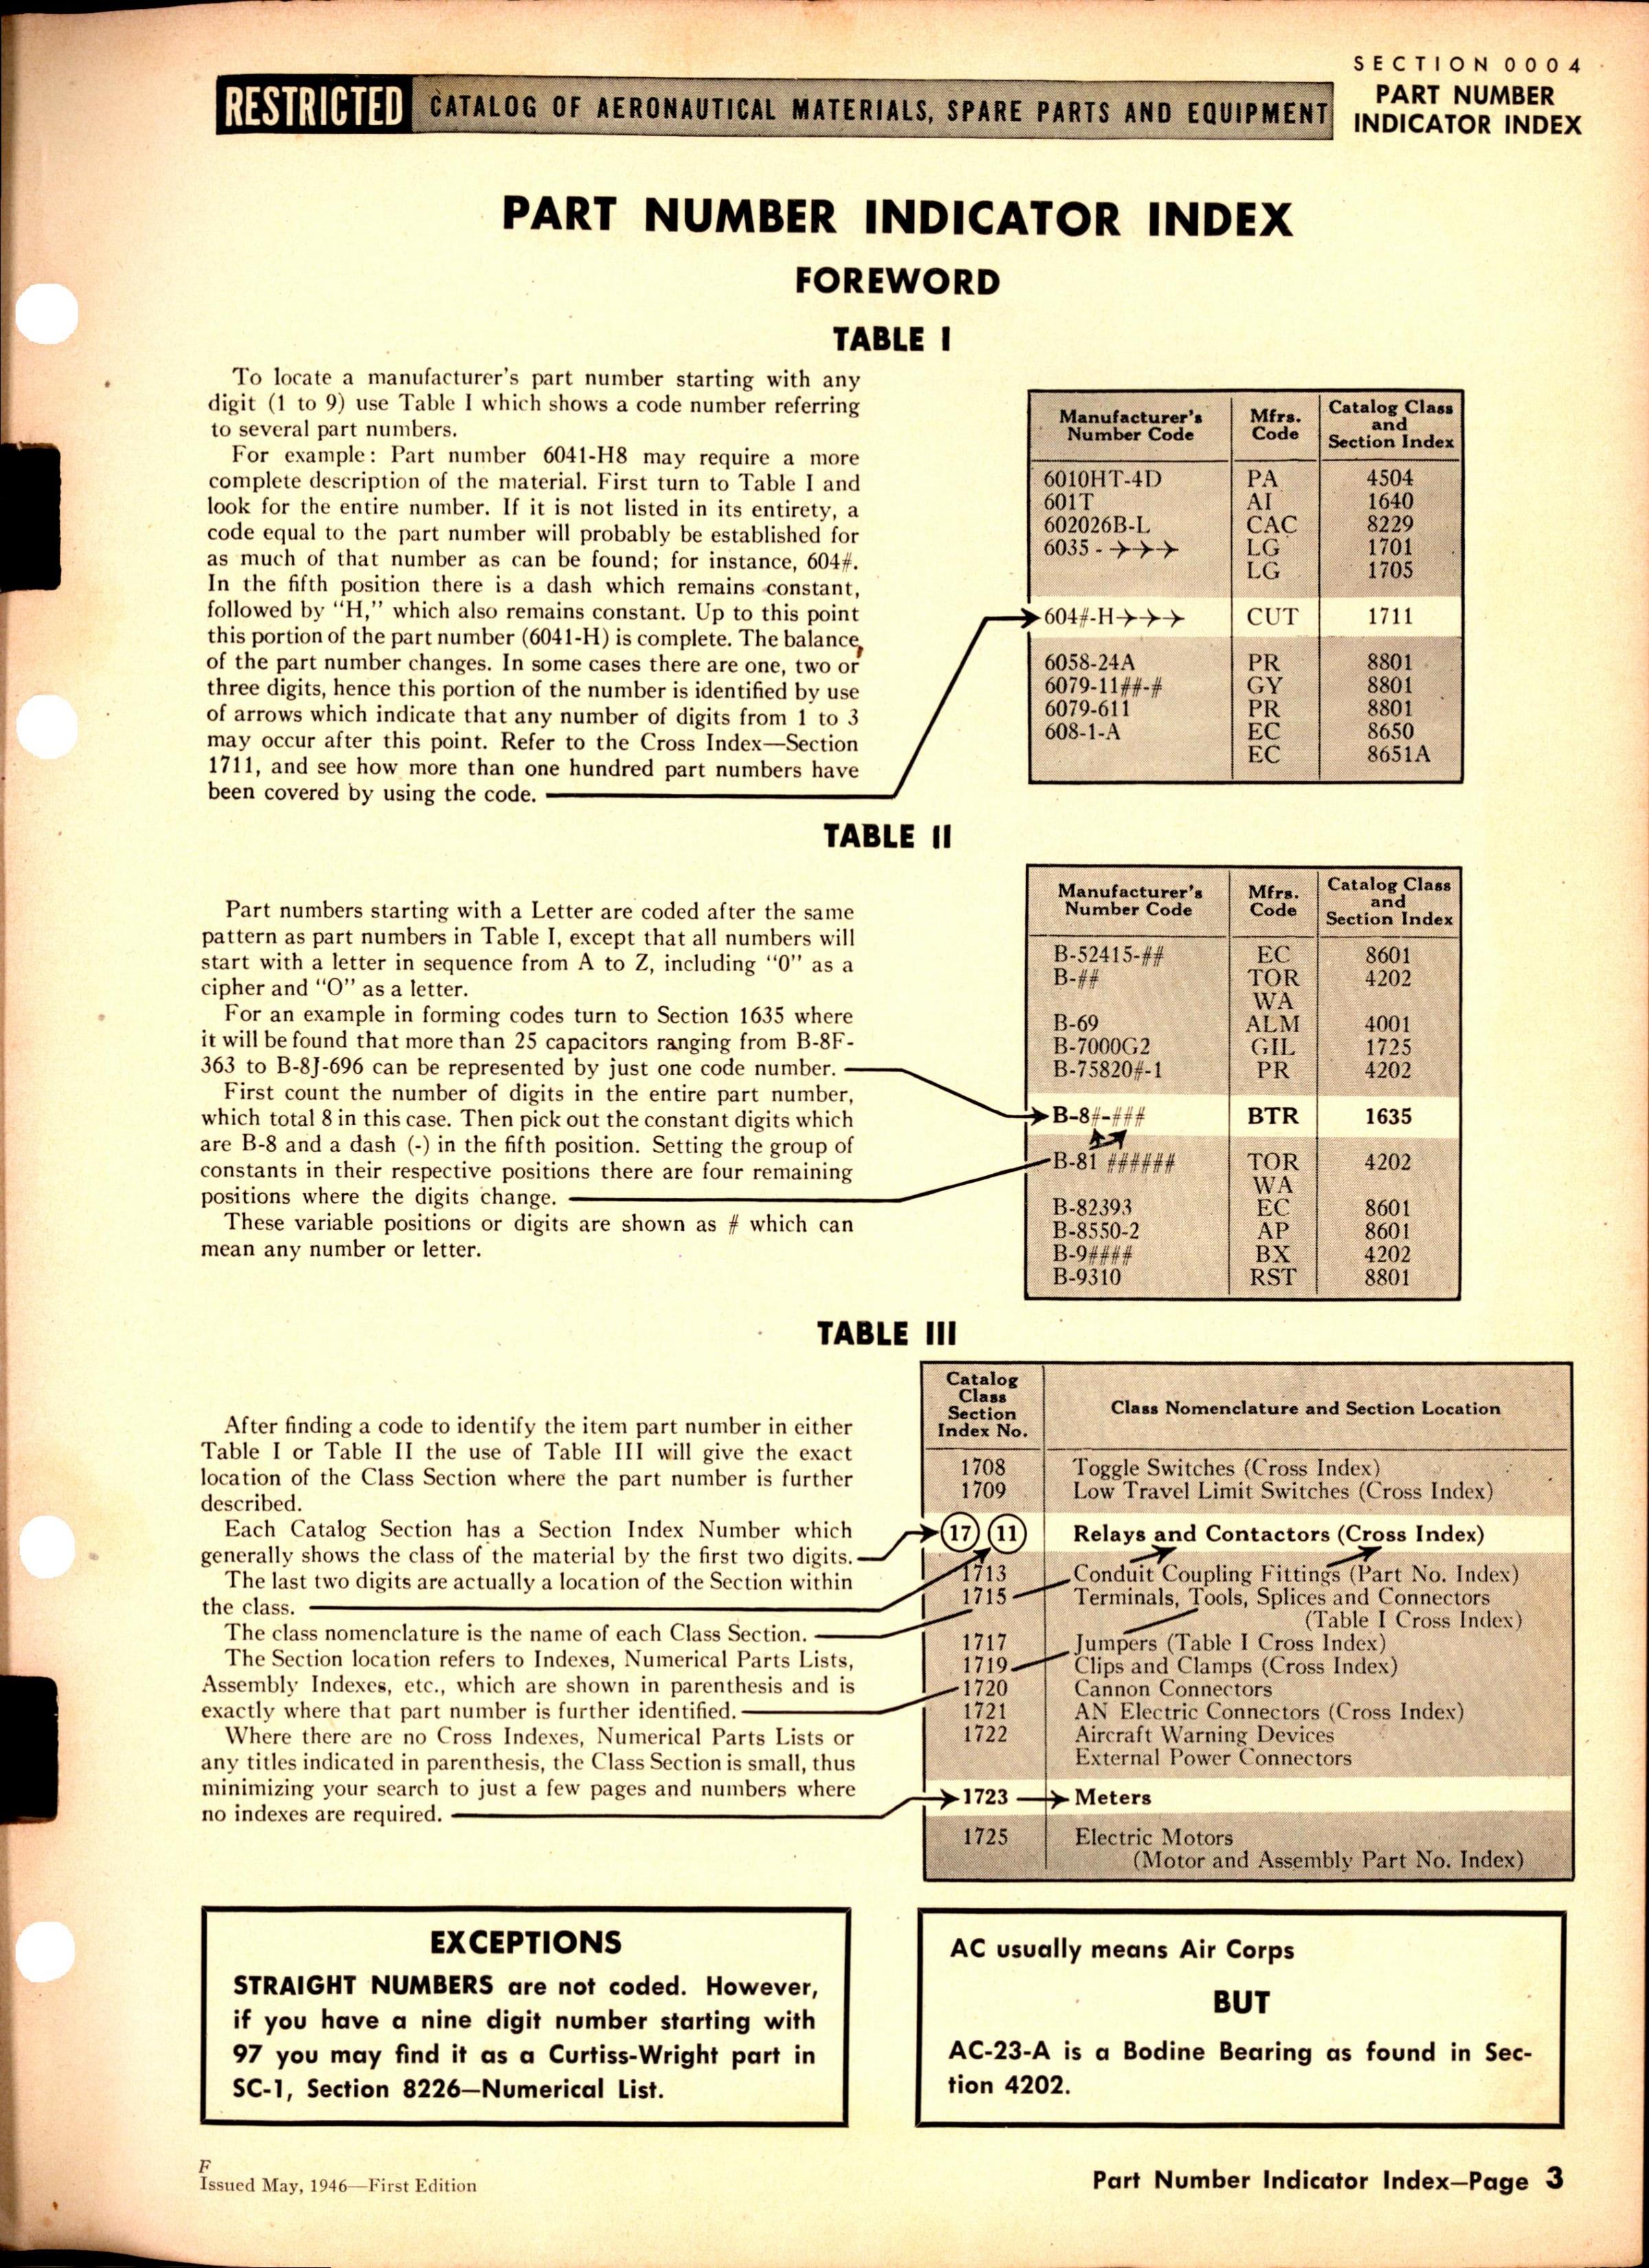 Sample page 3 from AirCorps Library document: Part No. Indicator Index